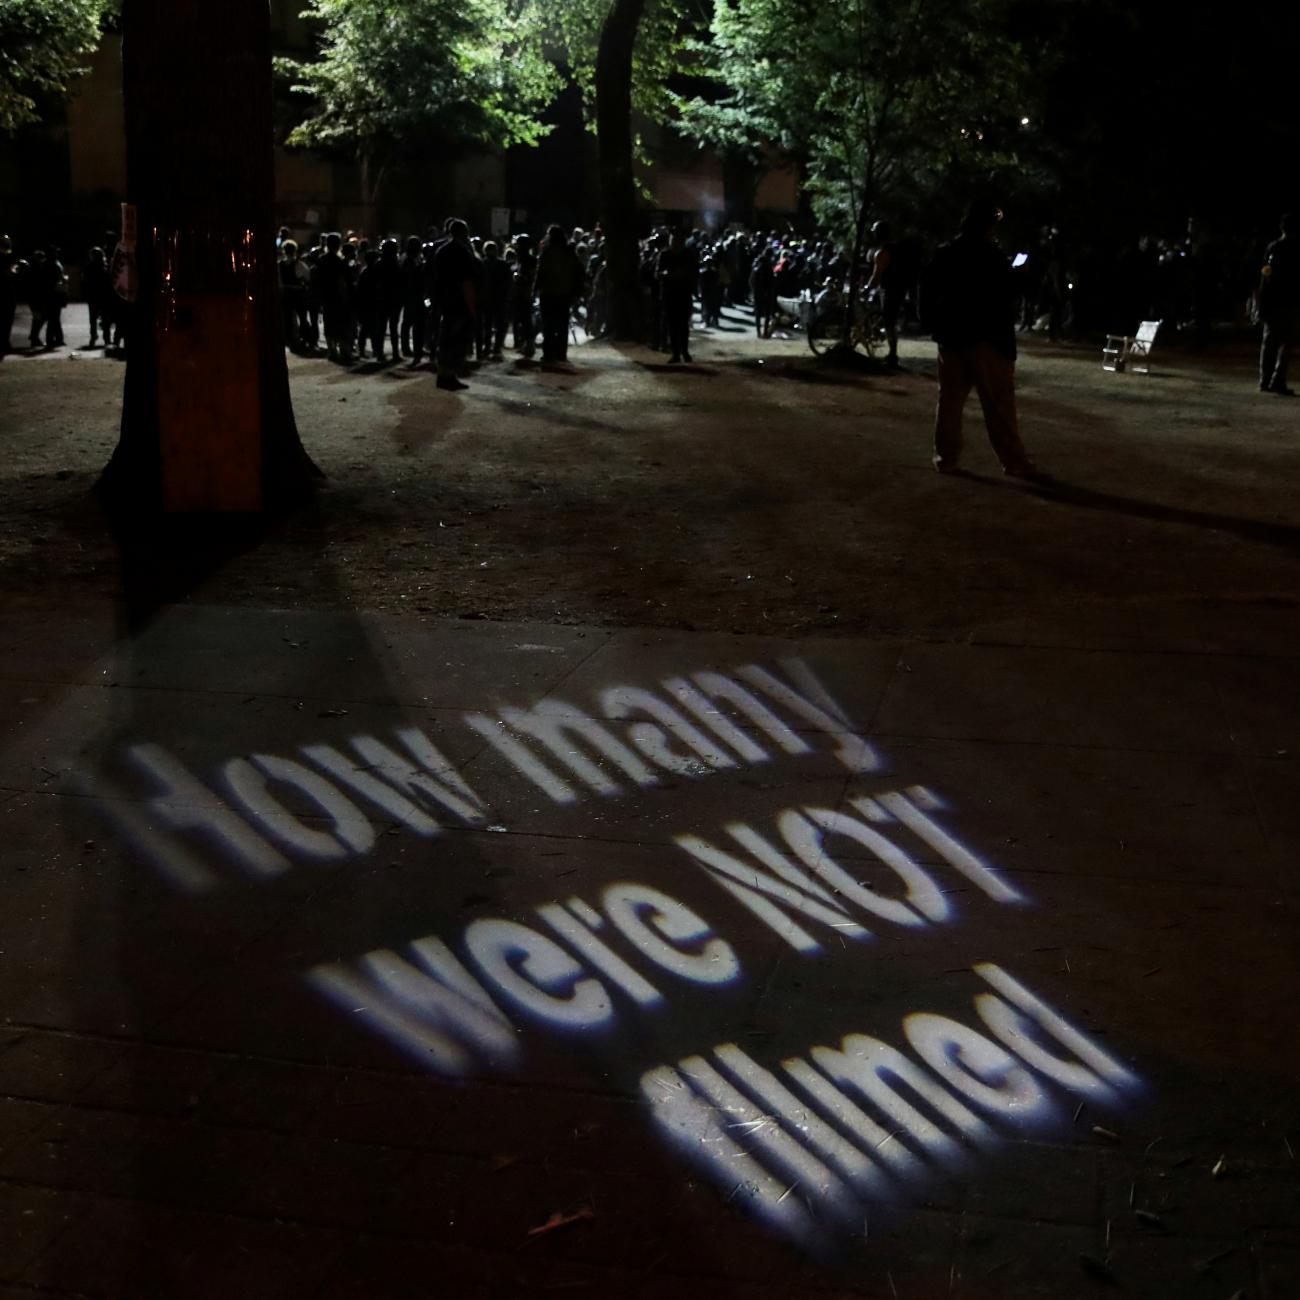 A protester casts a projection during a demonstration against police violence and racial inequality in Portland, Oregon, U.S., August 1, 2020. 